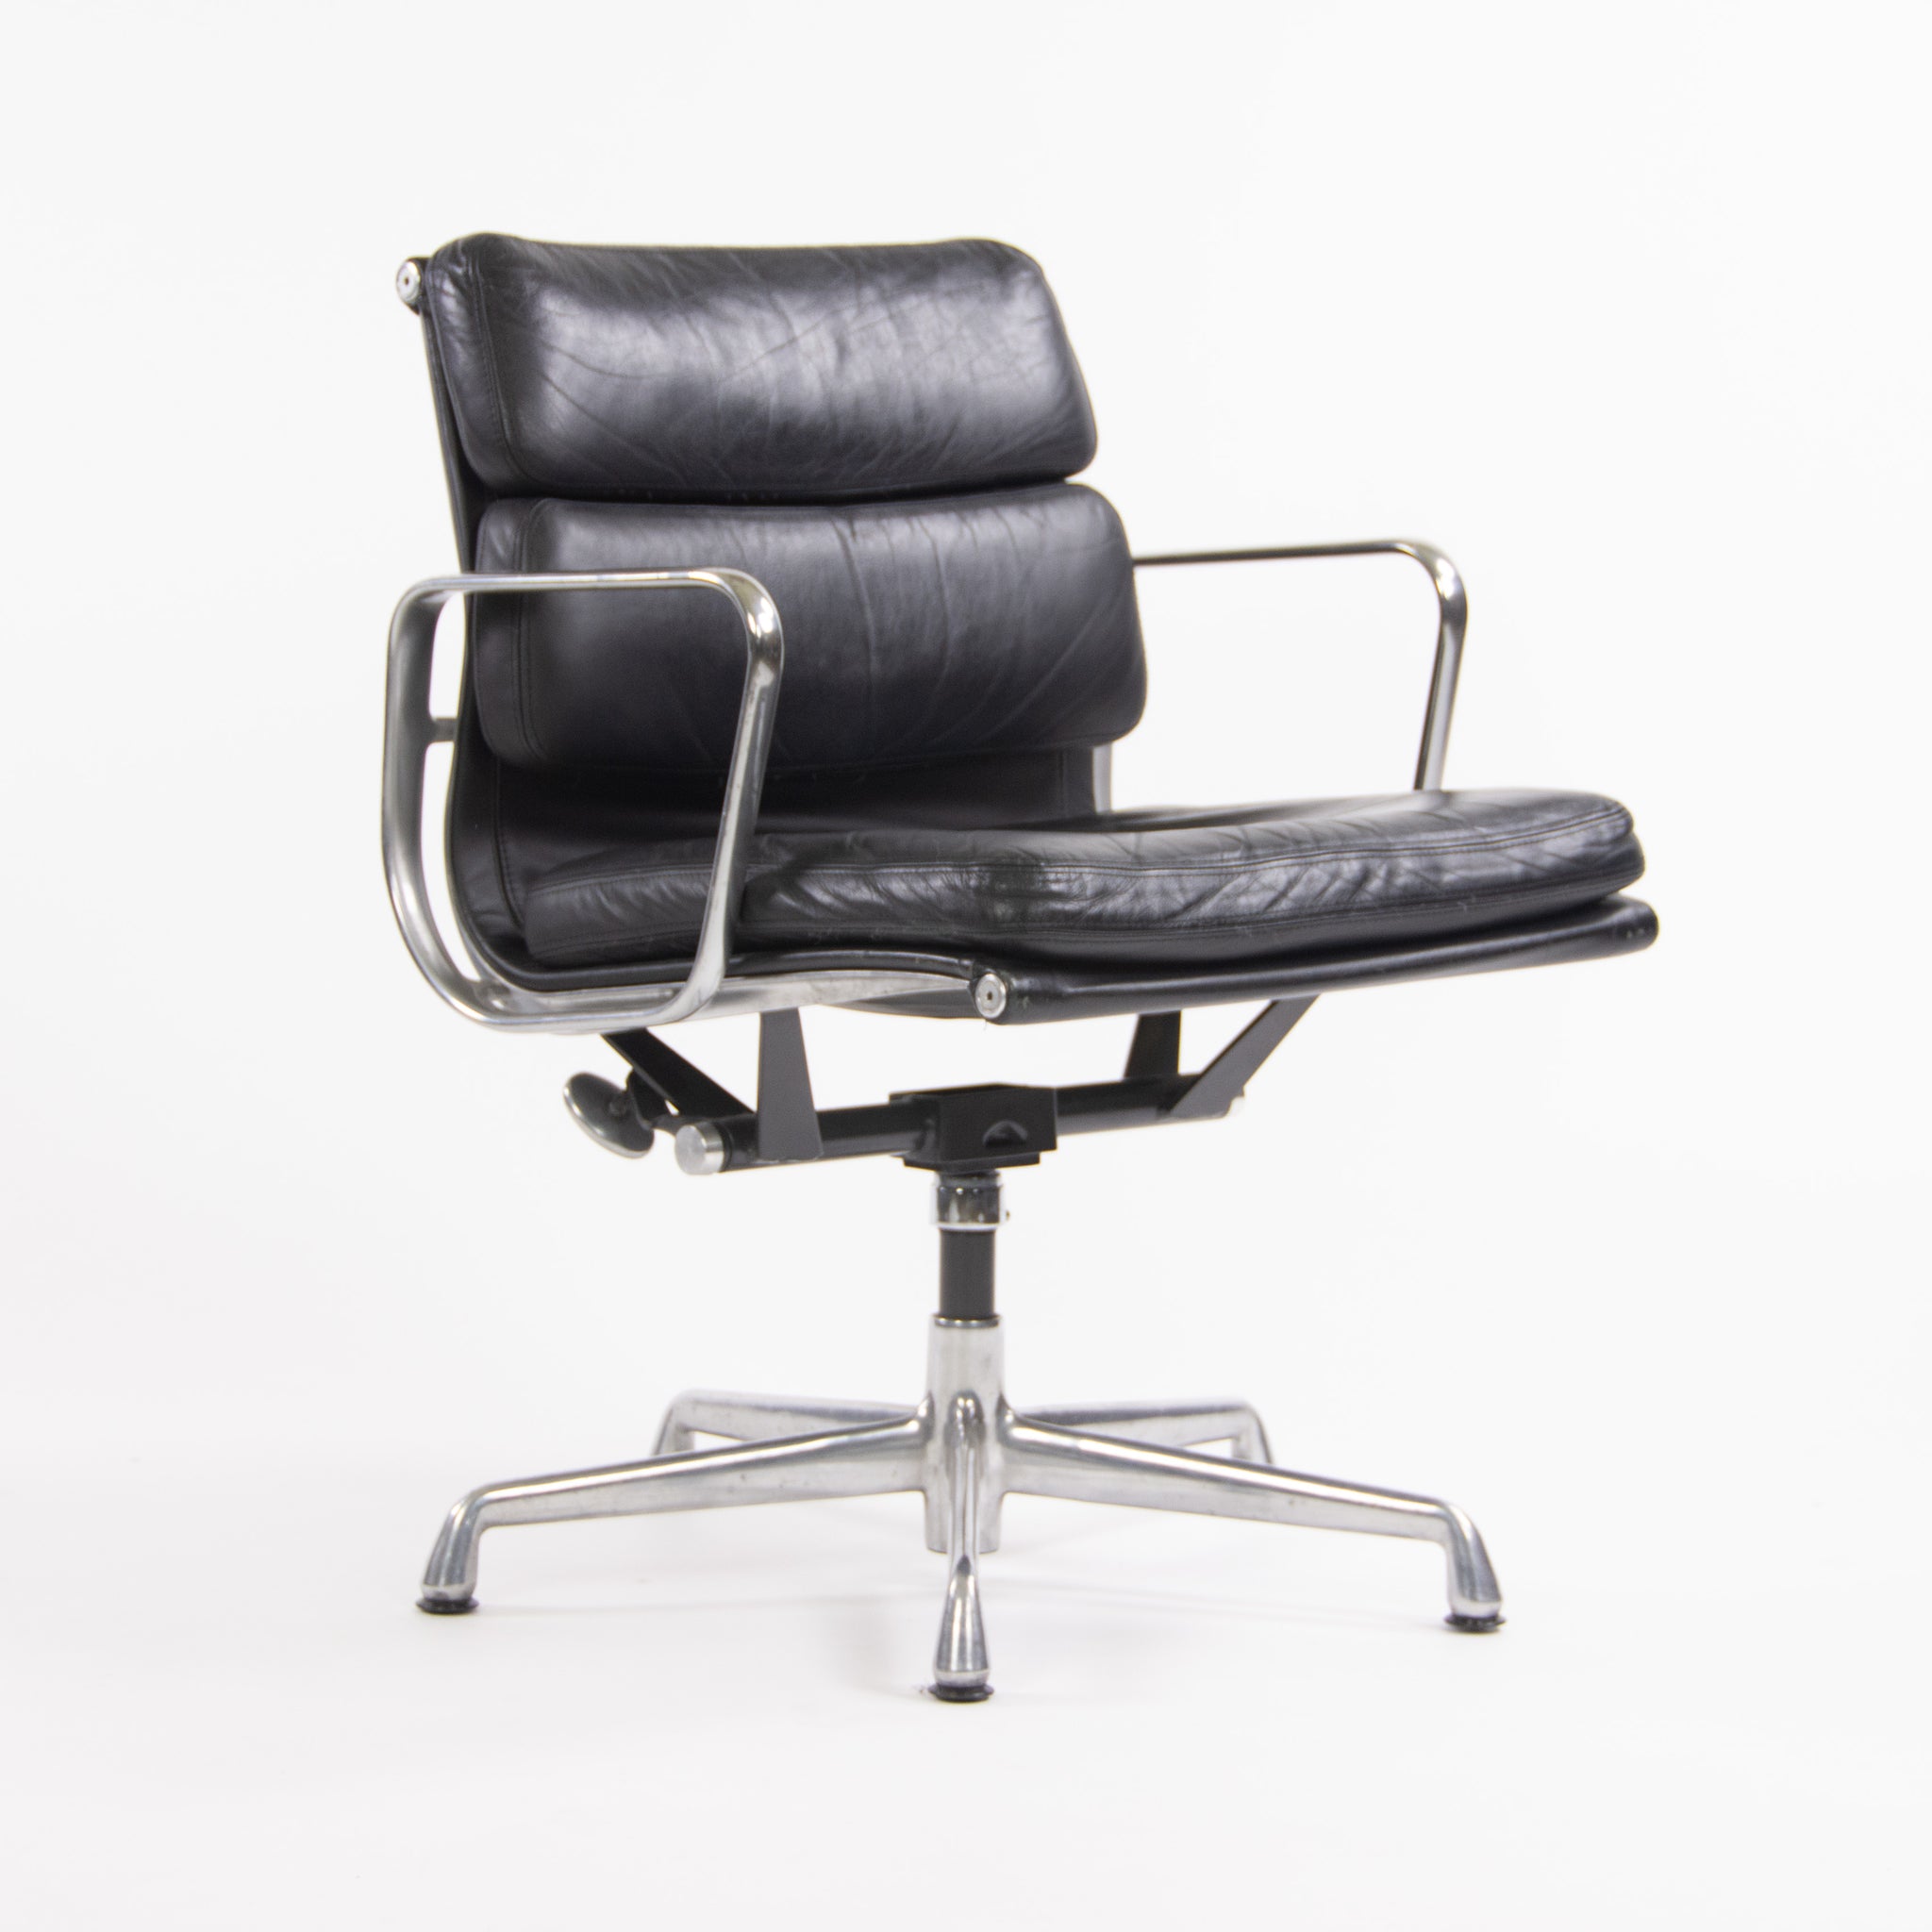 SOLD Herman Miller Eames Soft Pad Aluminum Group Chair Black Leather 2000s 4x Available